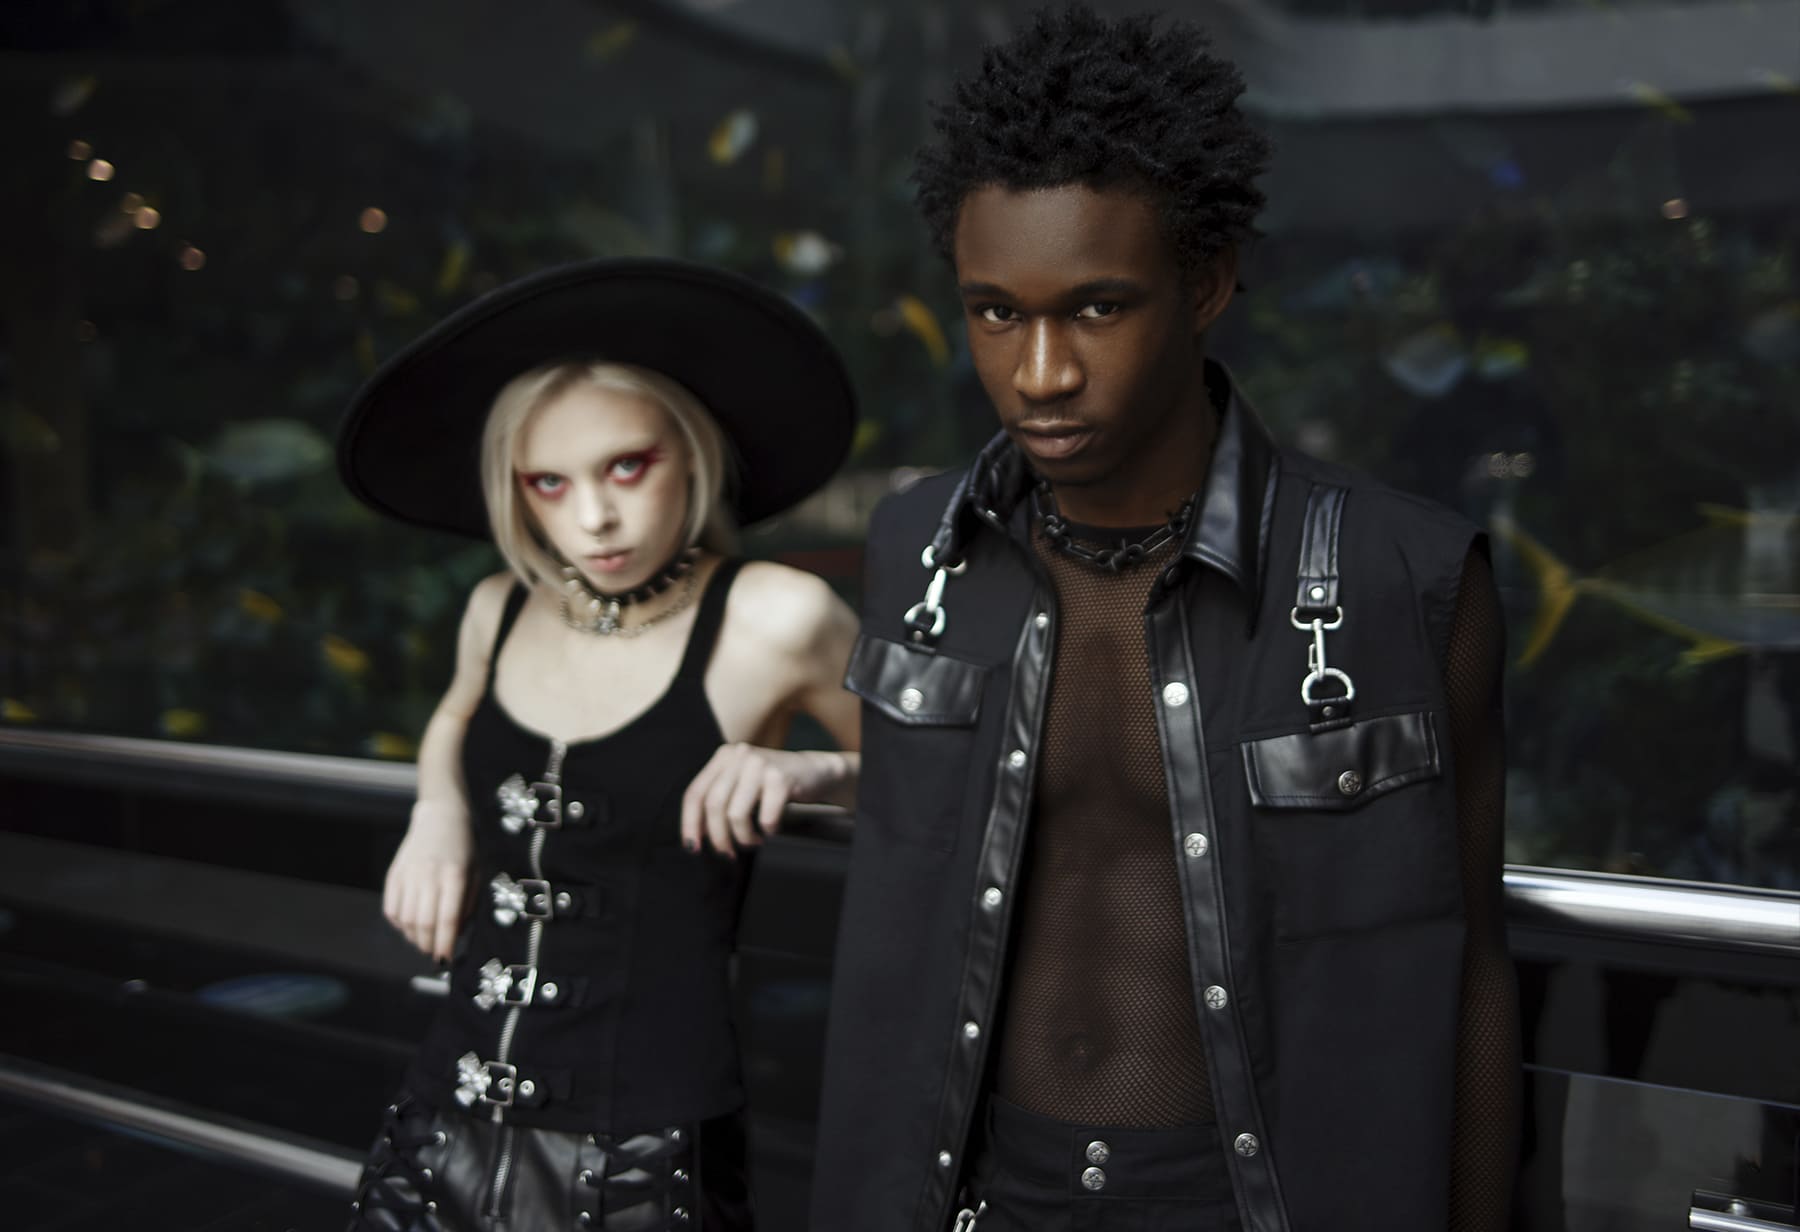 two gothic models wearing daily grunge clothes